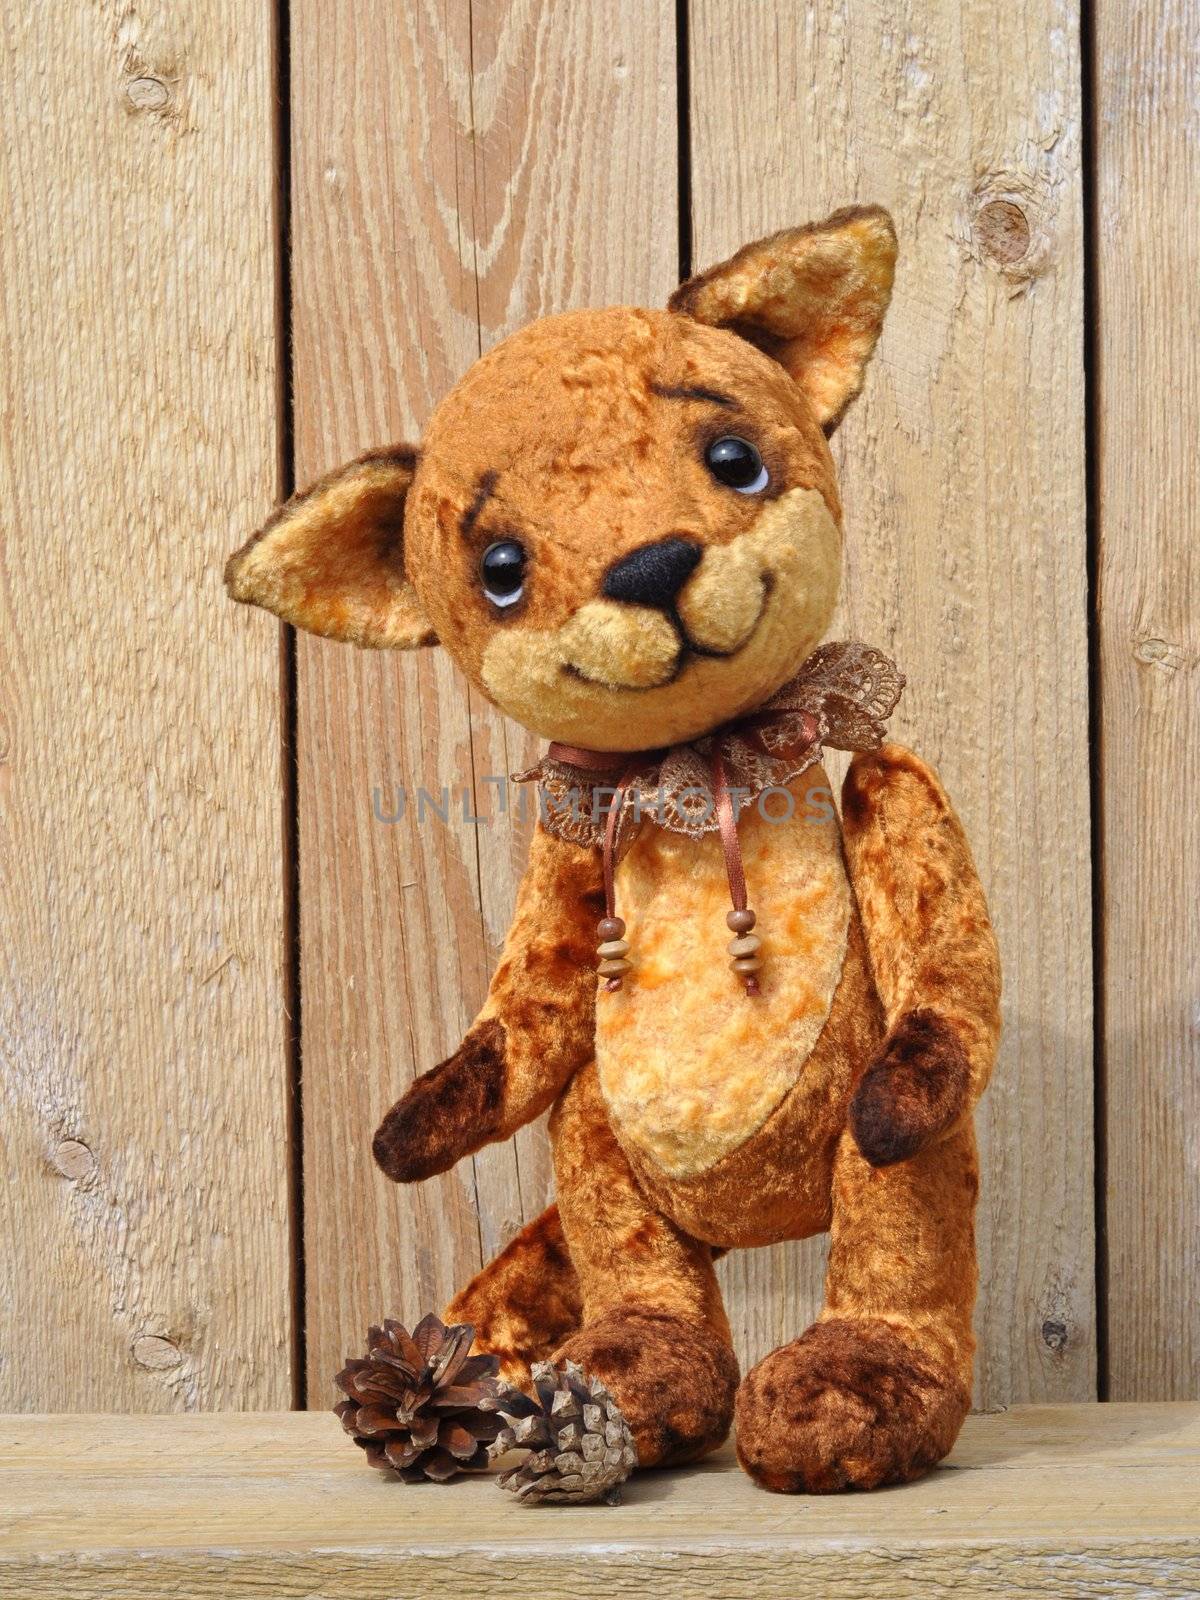 Handmade, the sewed plush toy: Ron fox cub on a board among flowers